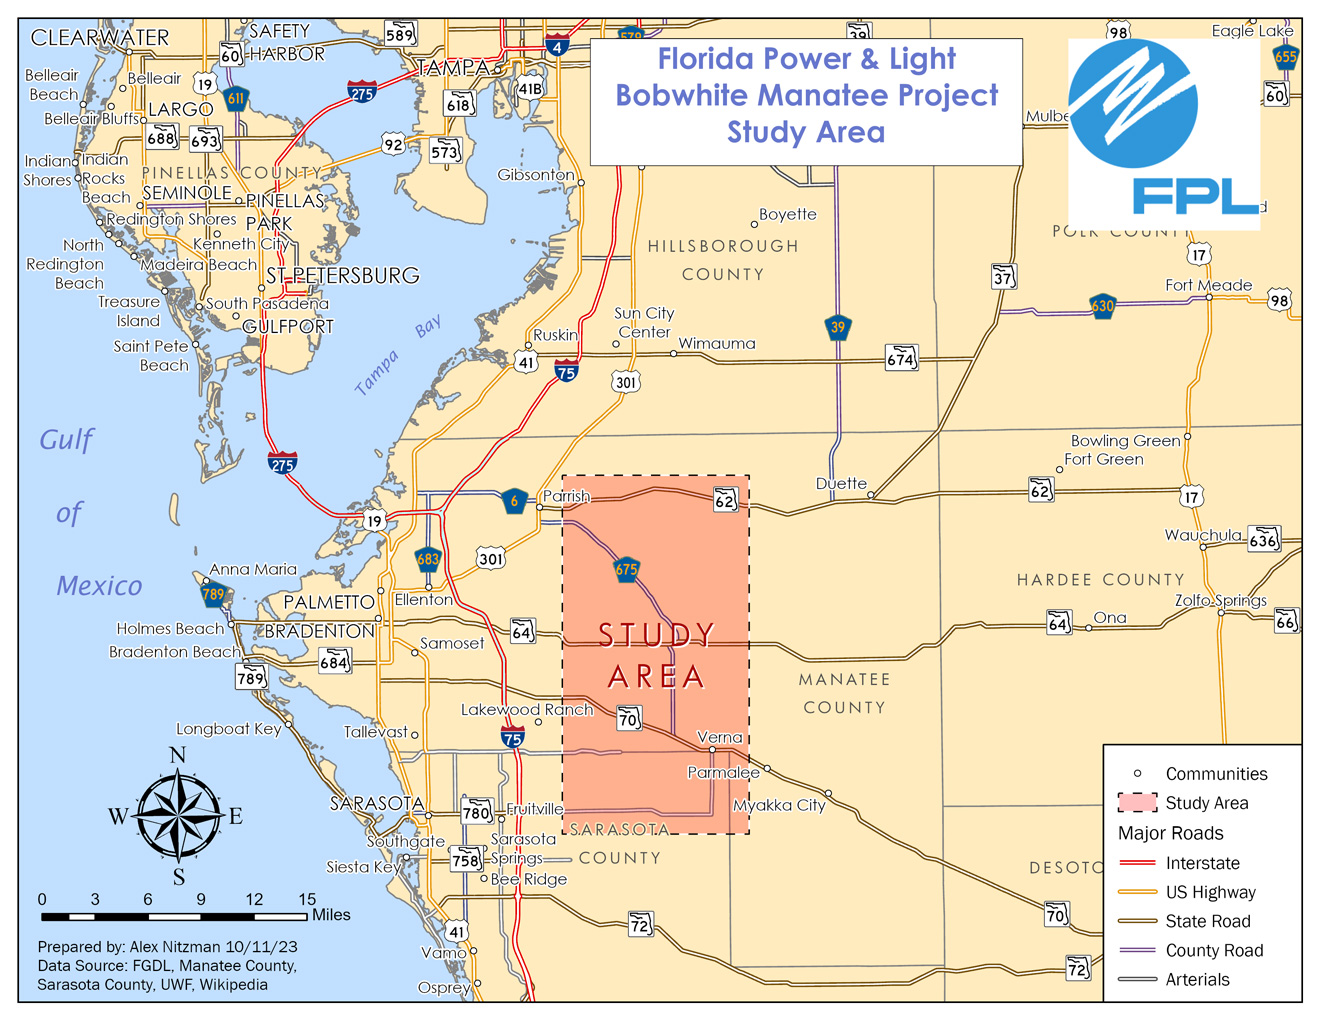 Map showing the Study Area for the Bobwhite Manatee Transmission Line project